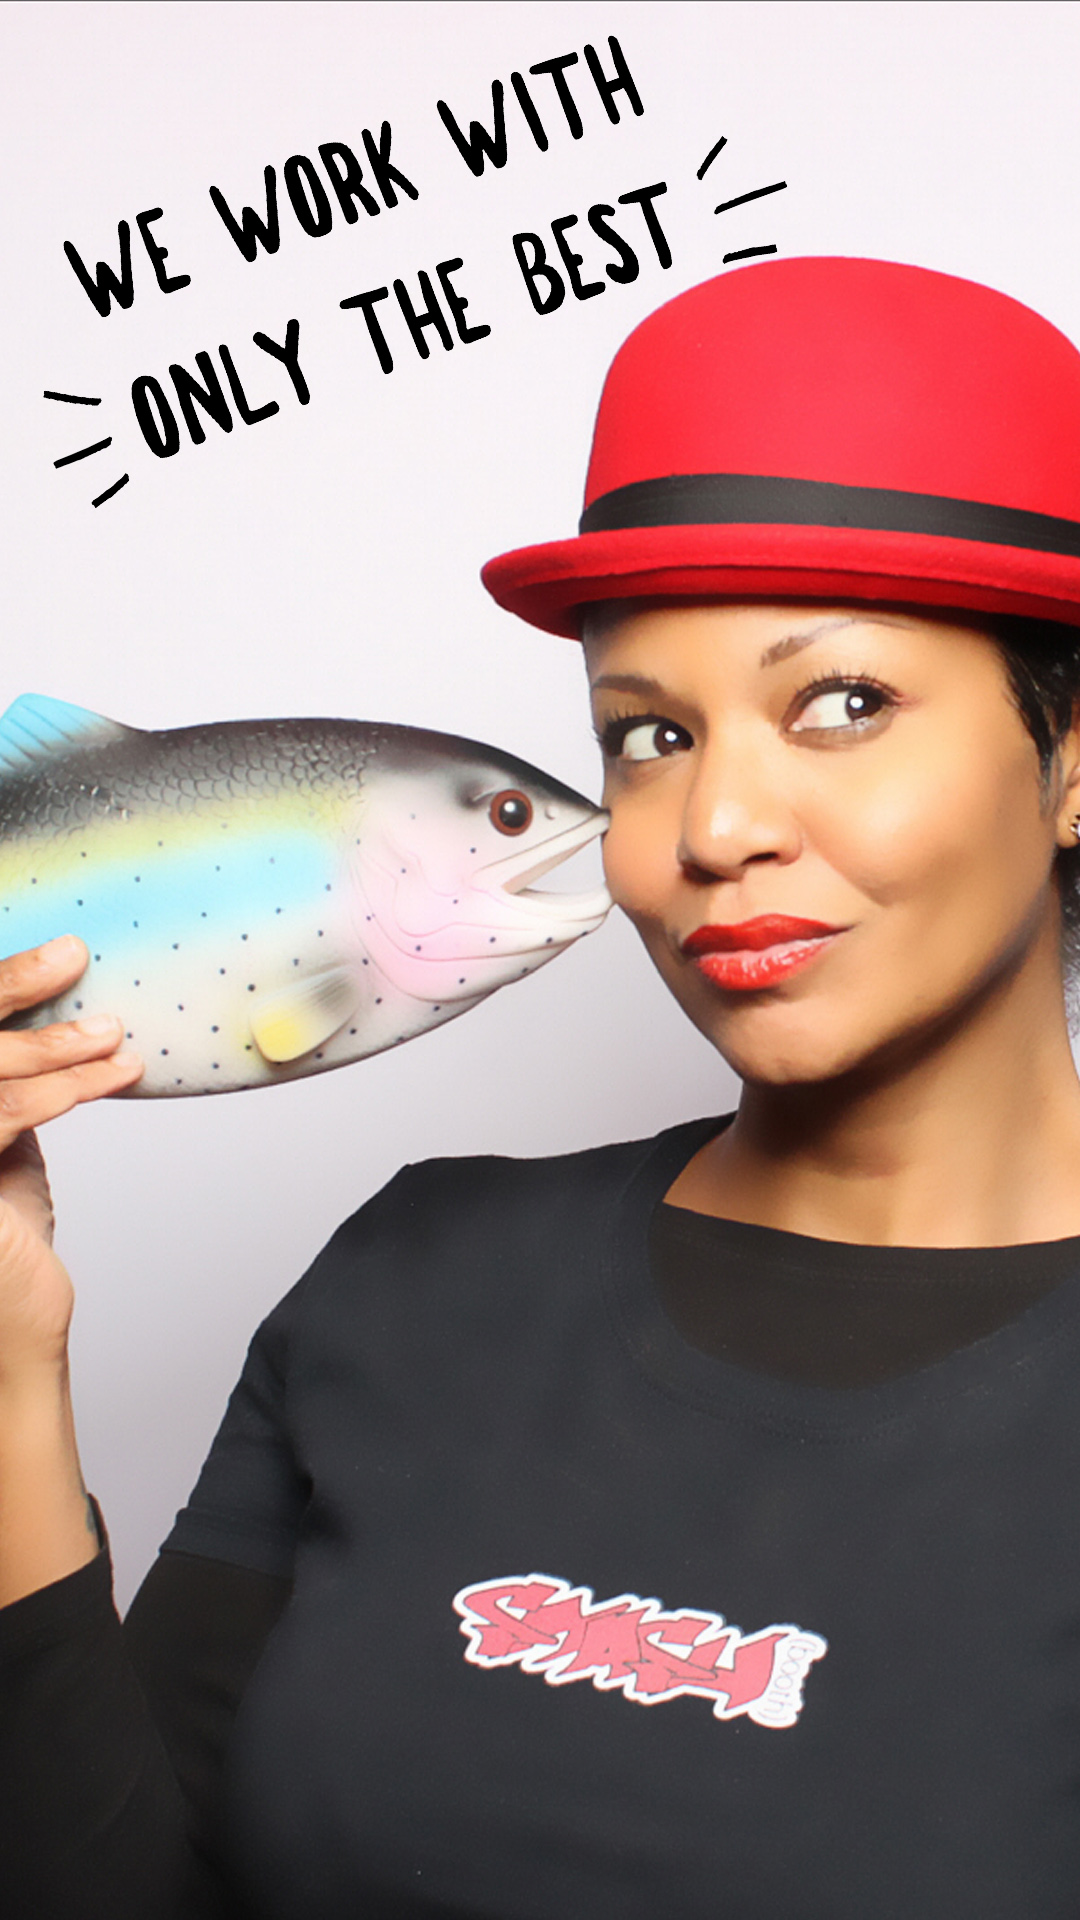 Smashbooth employee in red hat and vest with fish prop